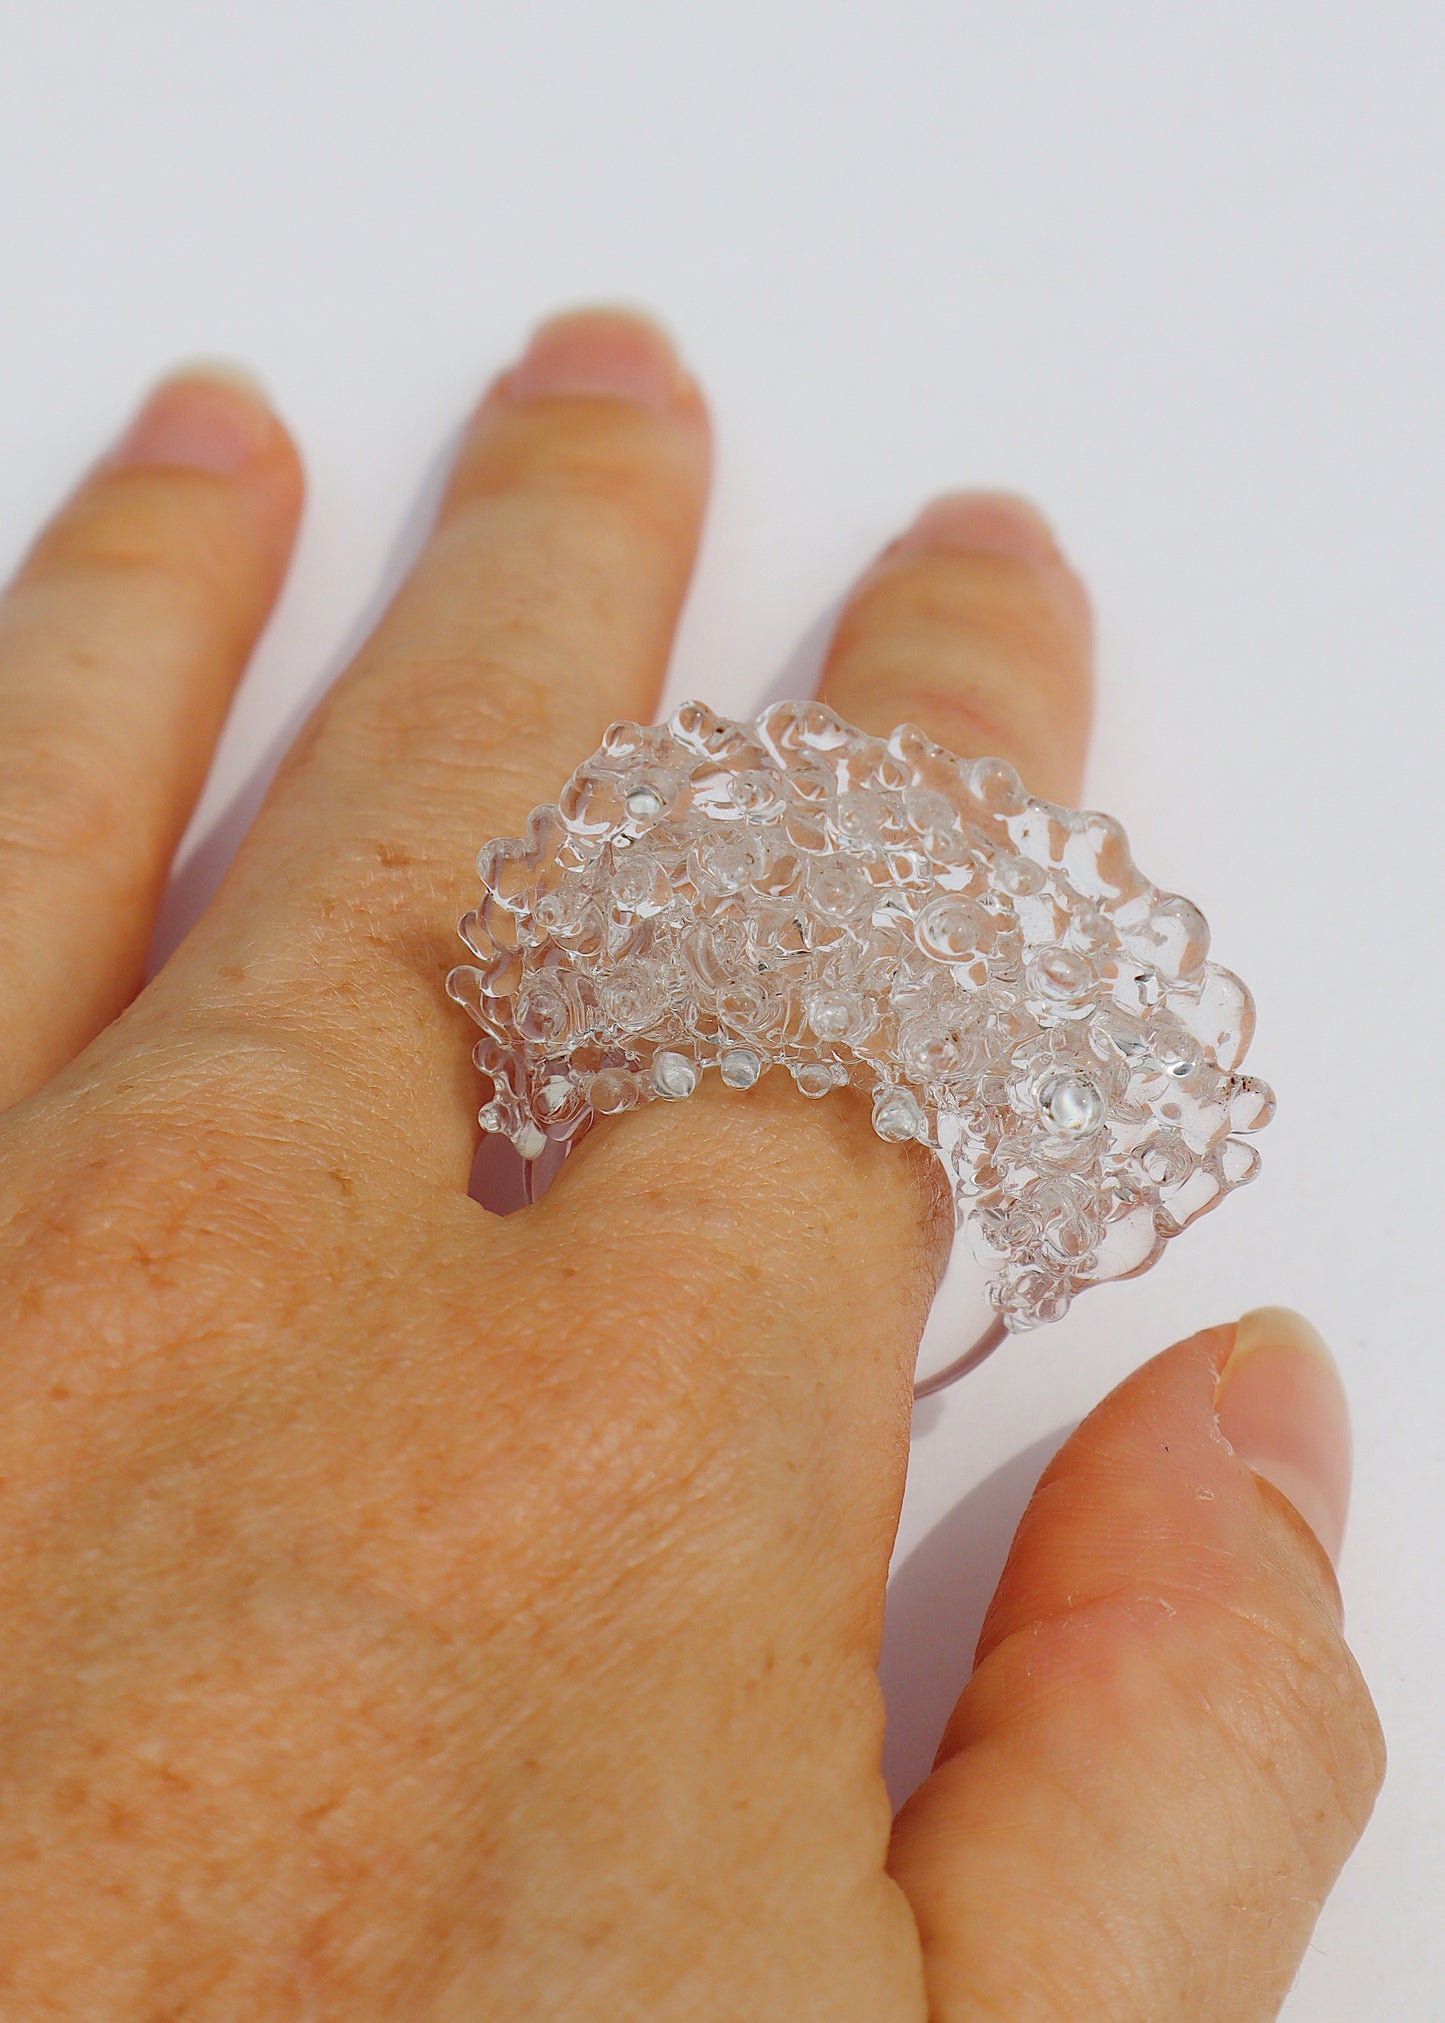 35% OFF SALE - Large Clear Textured Statement Ring // Size 9